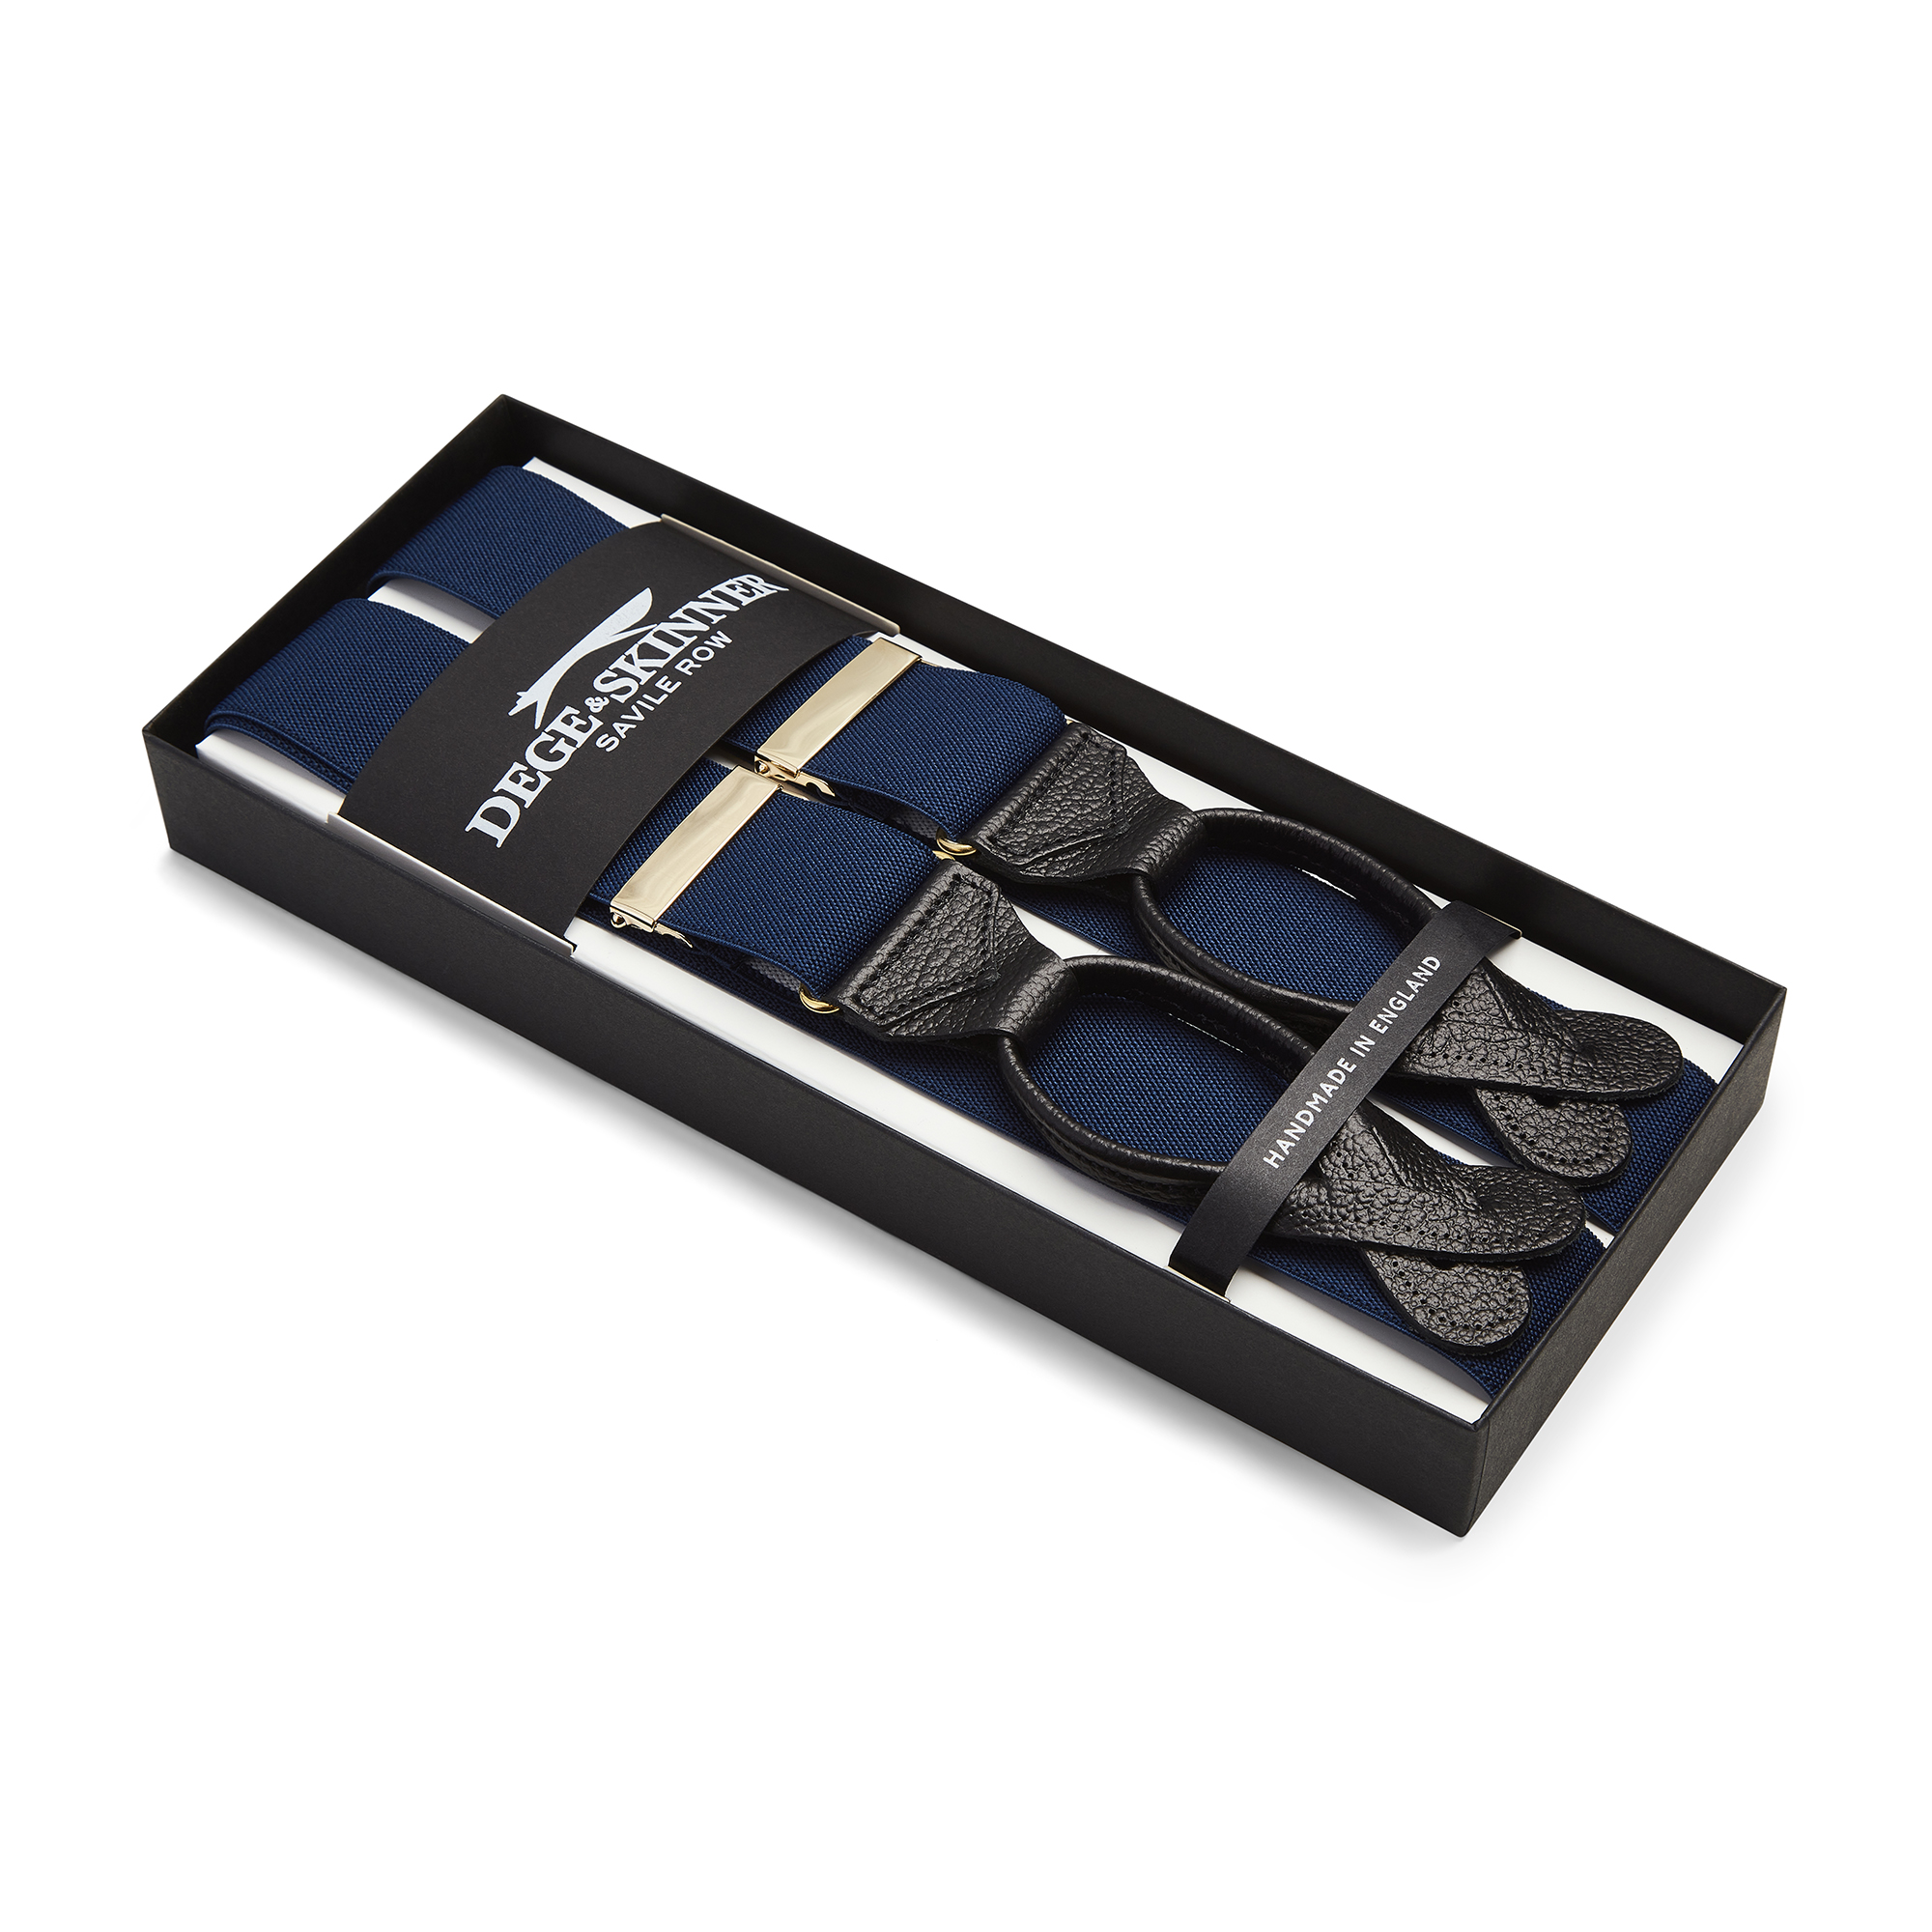 Strong Trouser Braces (Suspenders) 2.5 cm Wide - Available in Navy Blue,  Black, White or Red (Navy Blue) : Amazon.co.uk: Fashion